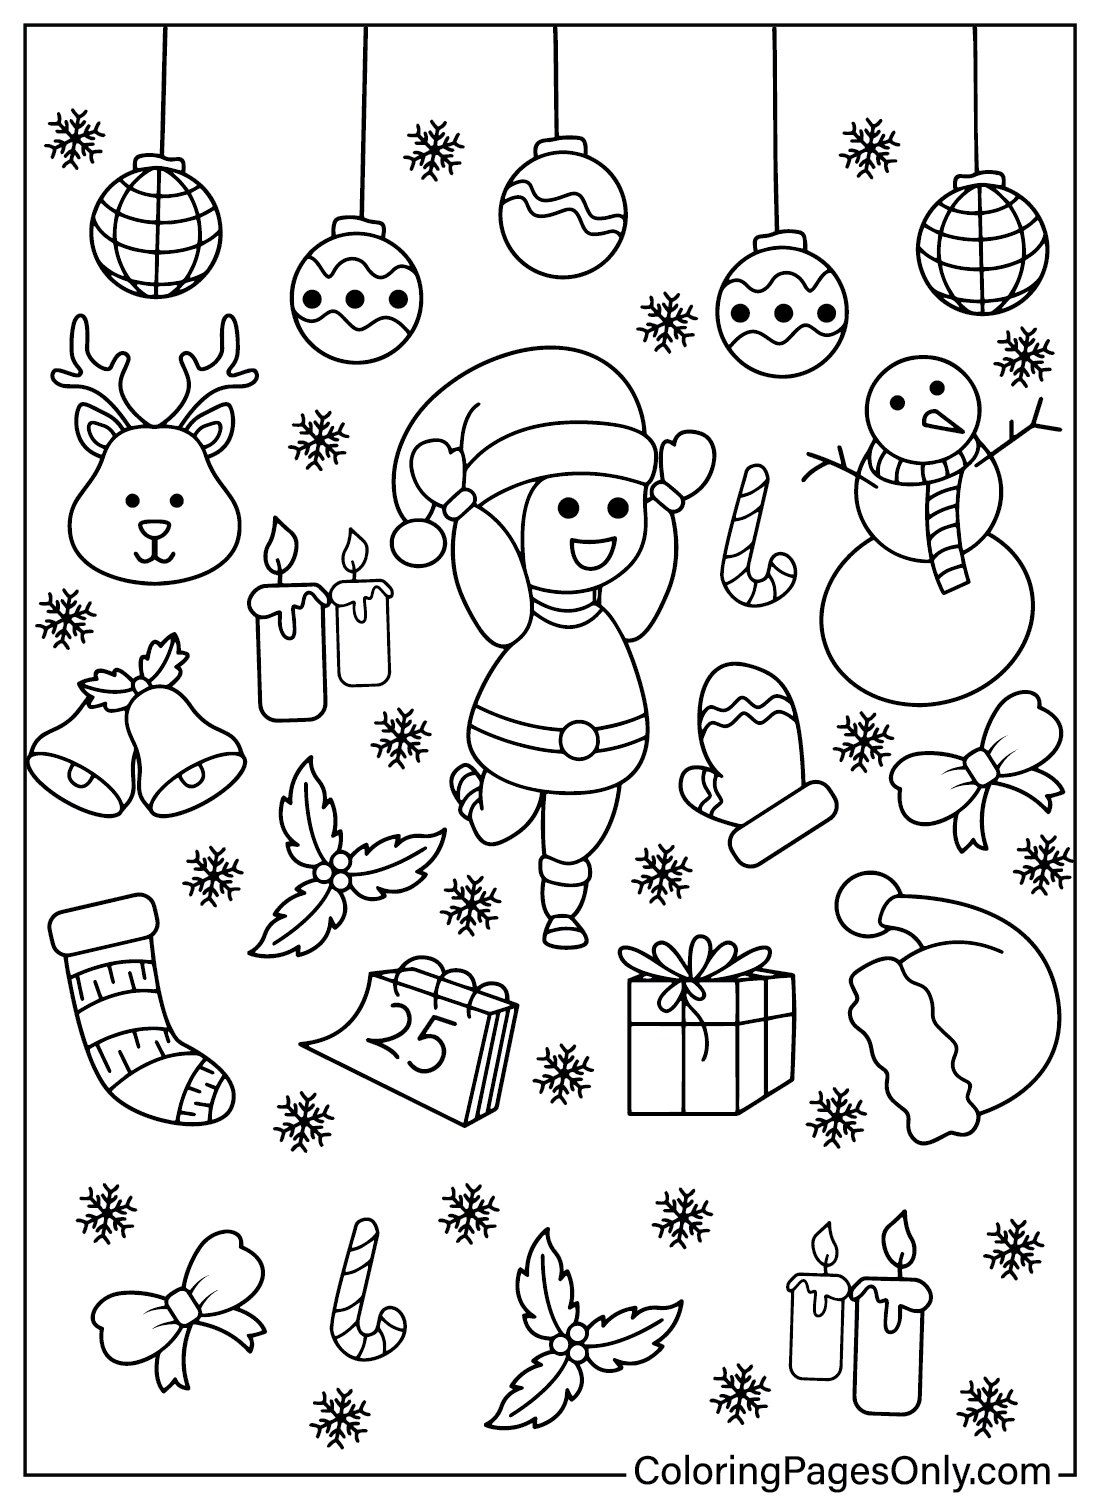 Christmas Ornaments Picture to Color